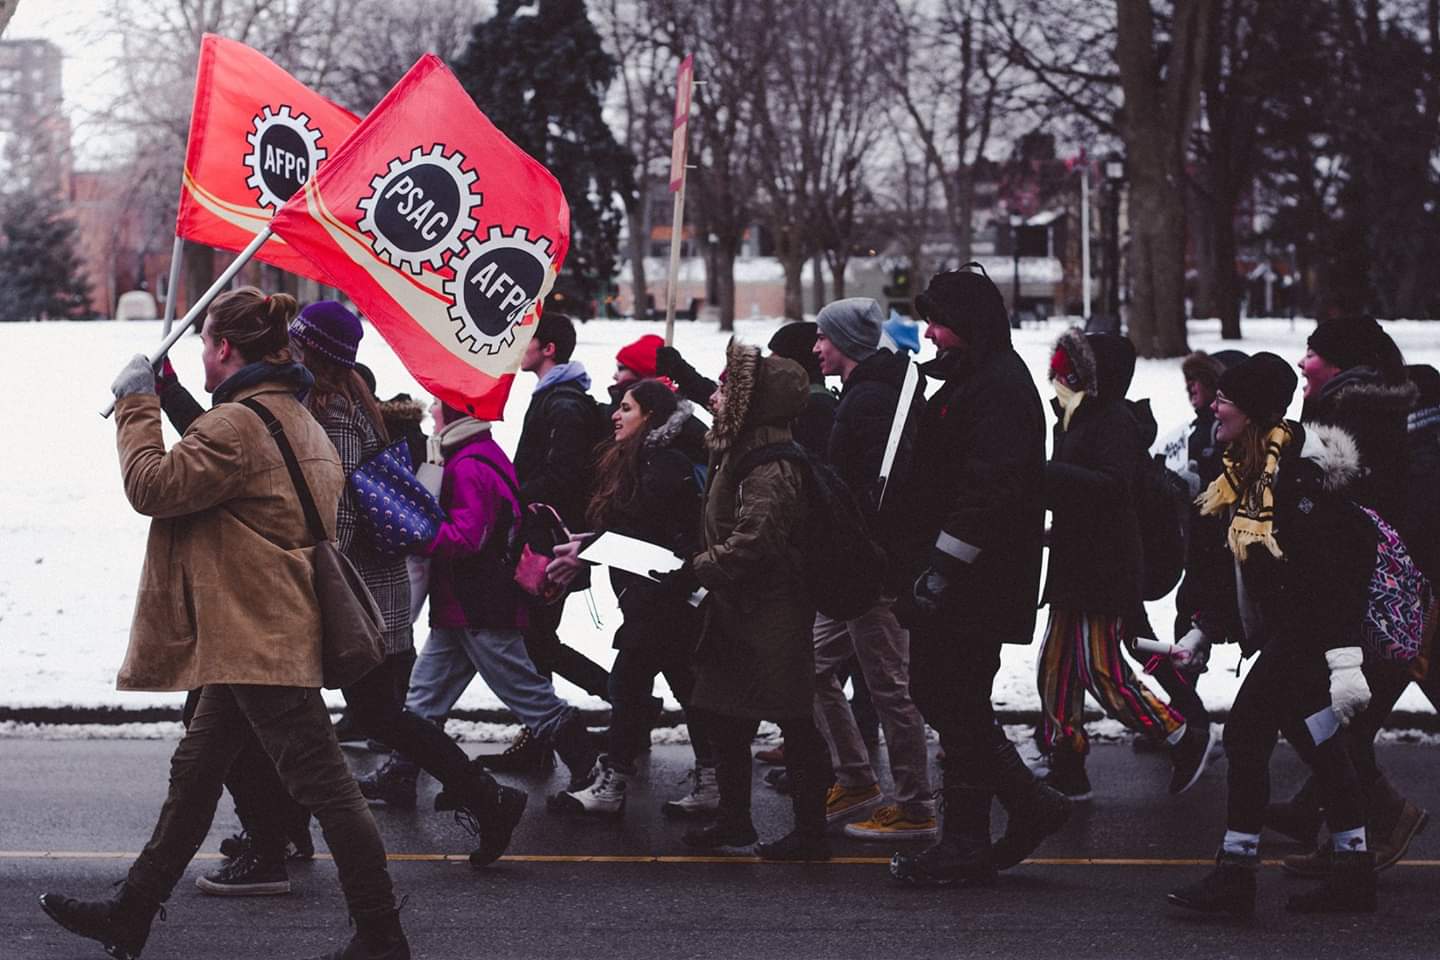 Fanshawe College Walkout: March 20th at Noon